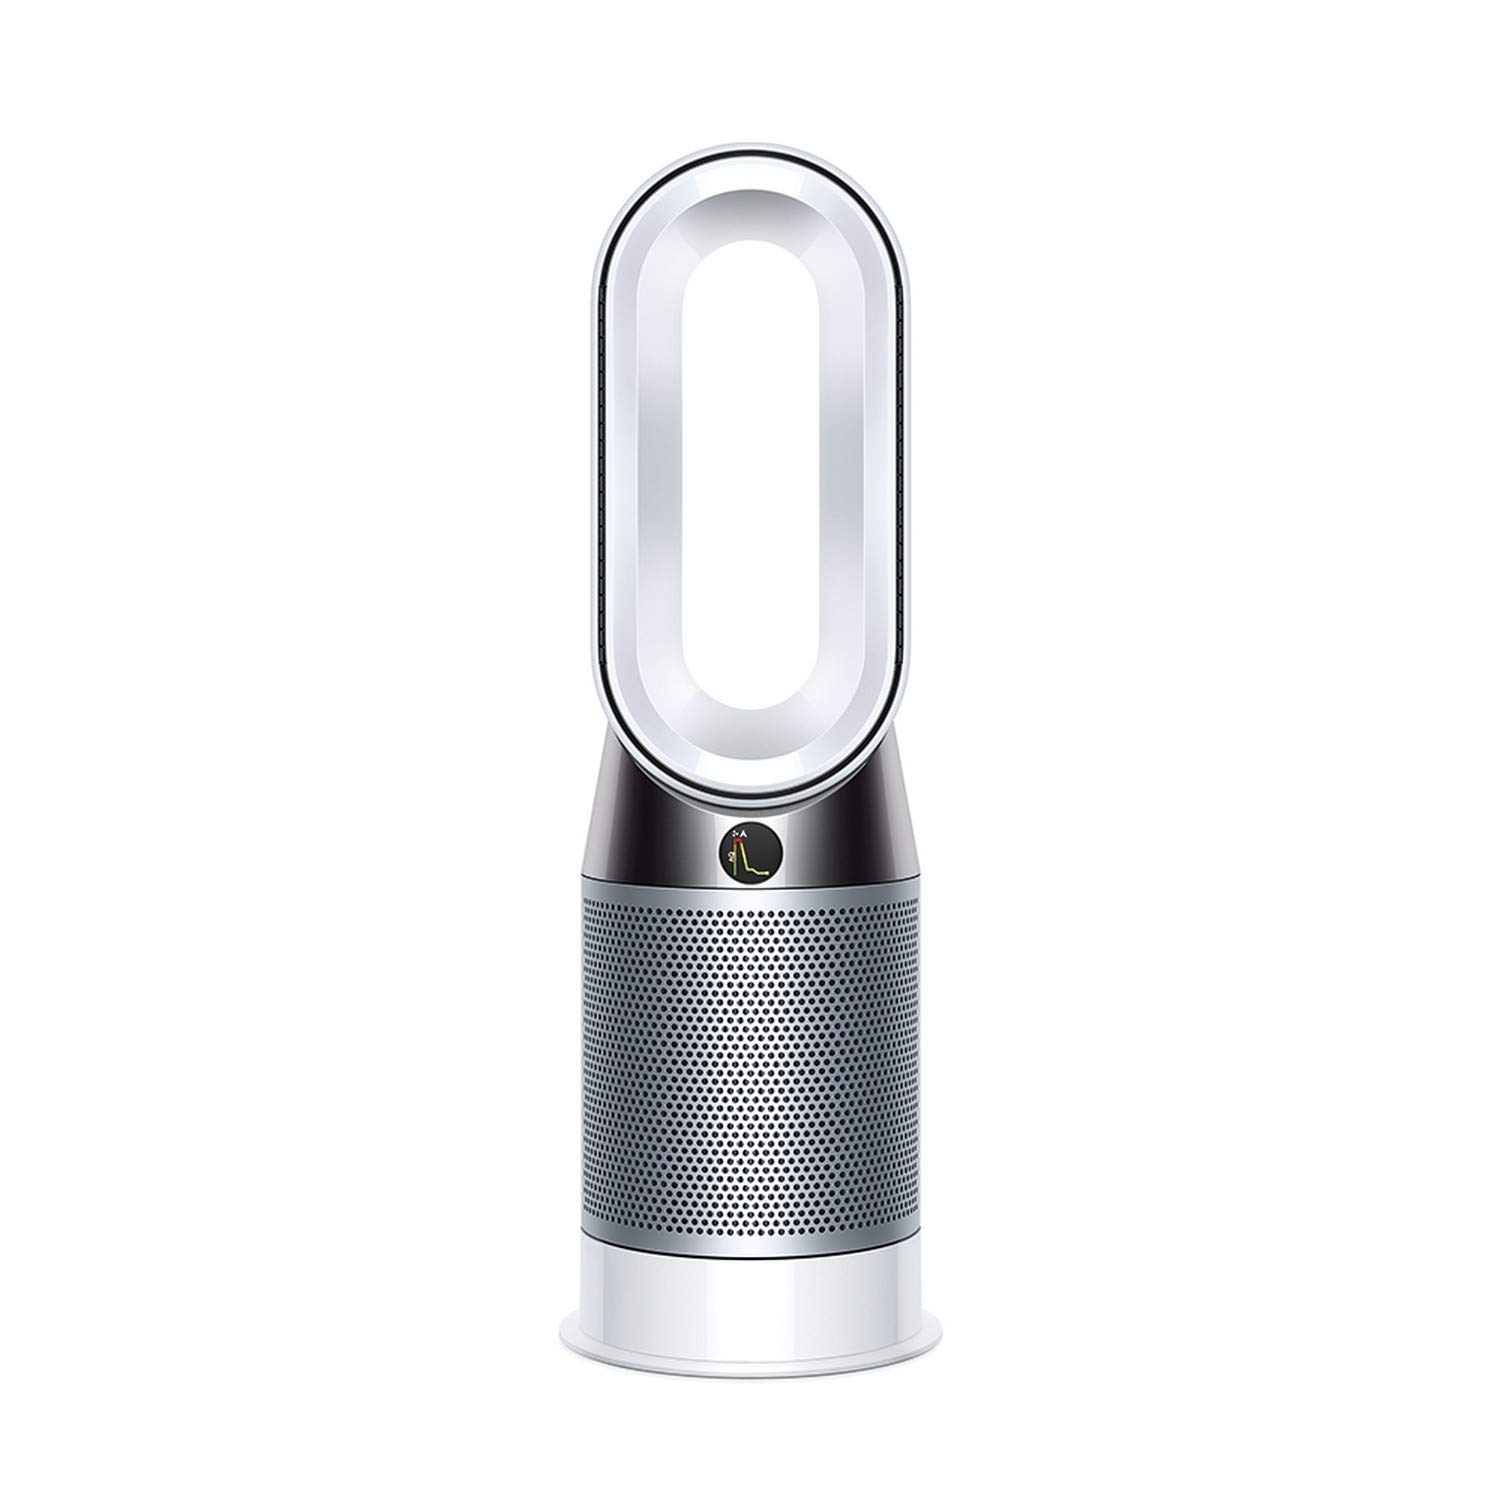 Dyson Pure Hot+Cool is the no. 1 best air purifier in India for home that removes PM 2.5, PM 10, VOC, and NO2, gases, allergens